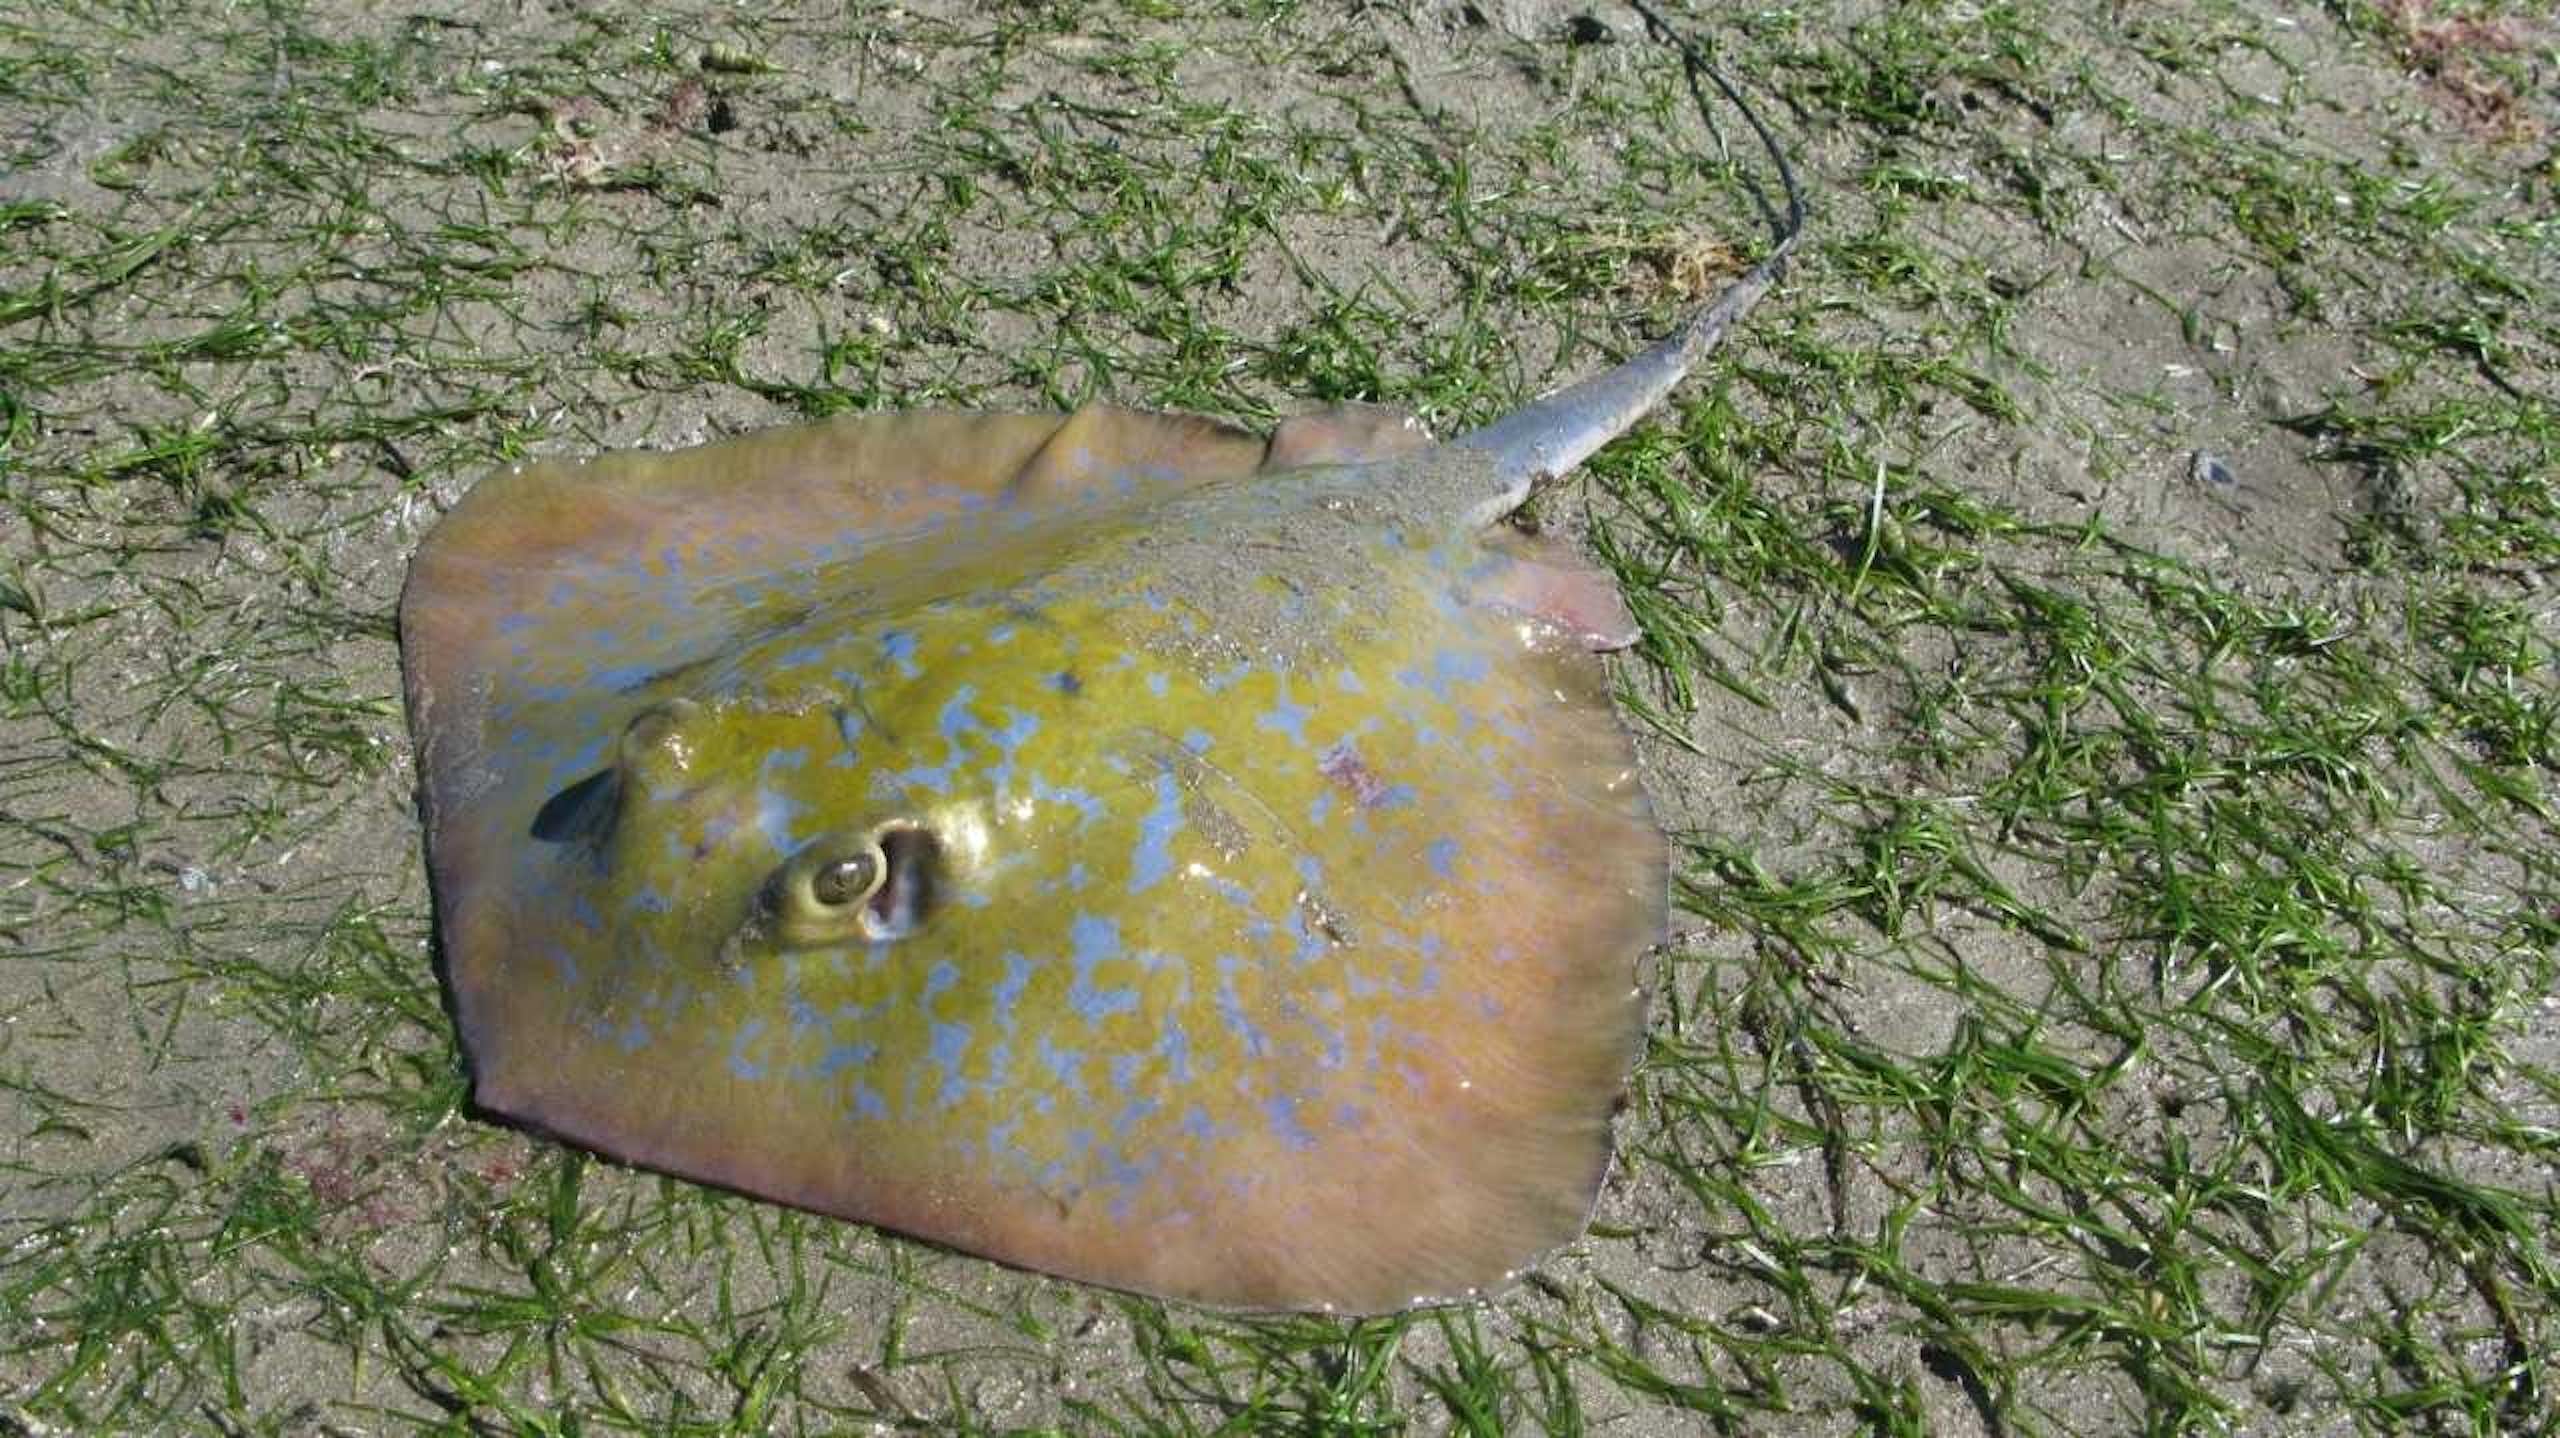 A greyish-blue disc-shaped marine creature with blue spots in shallow fresh water